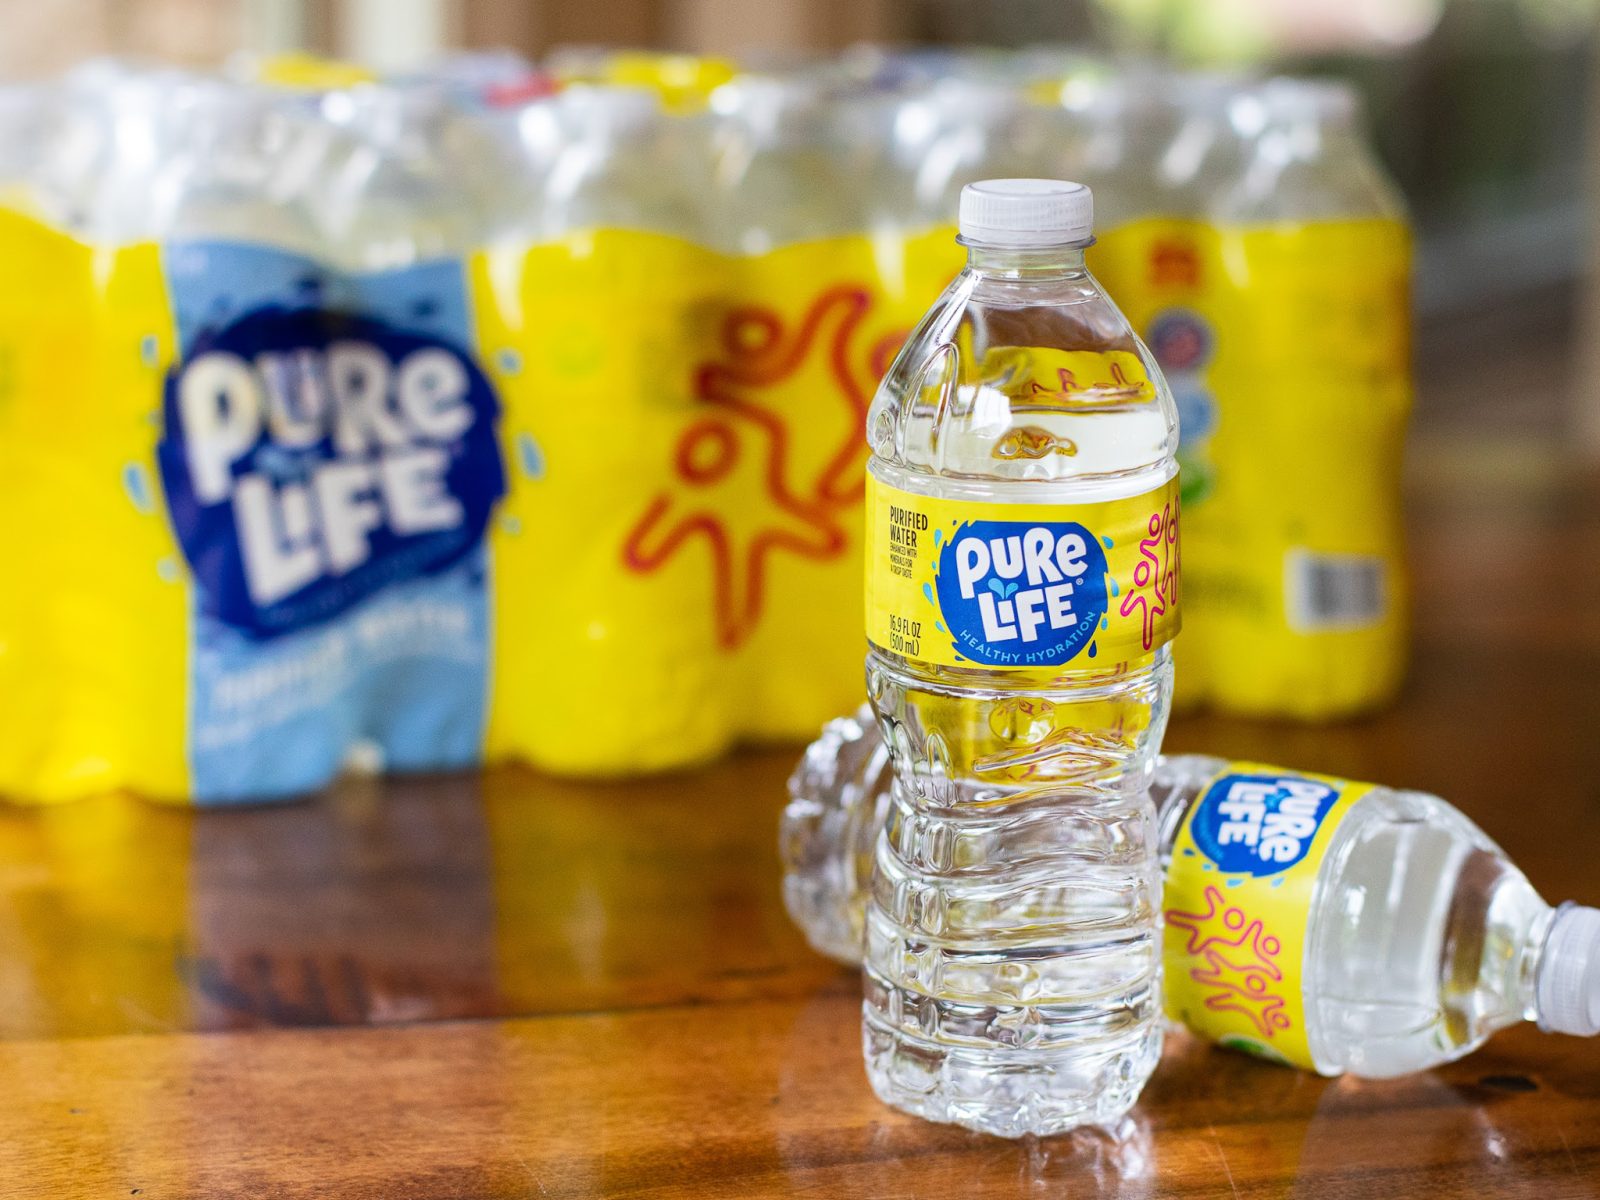 Pure Life Purified Water 24-Pack Just $2.79 At Kroger